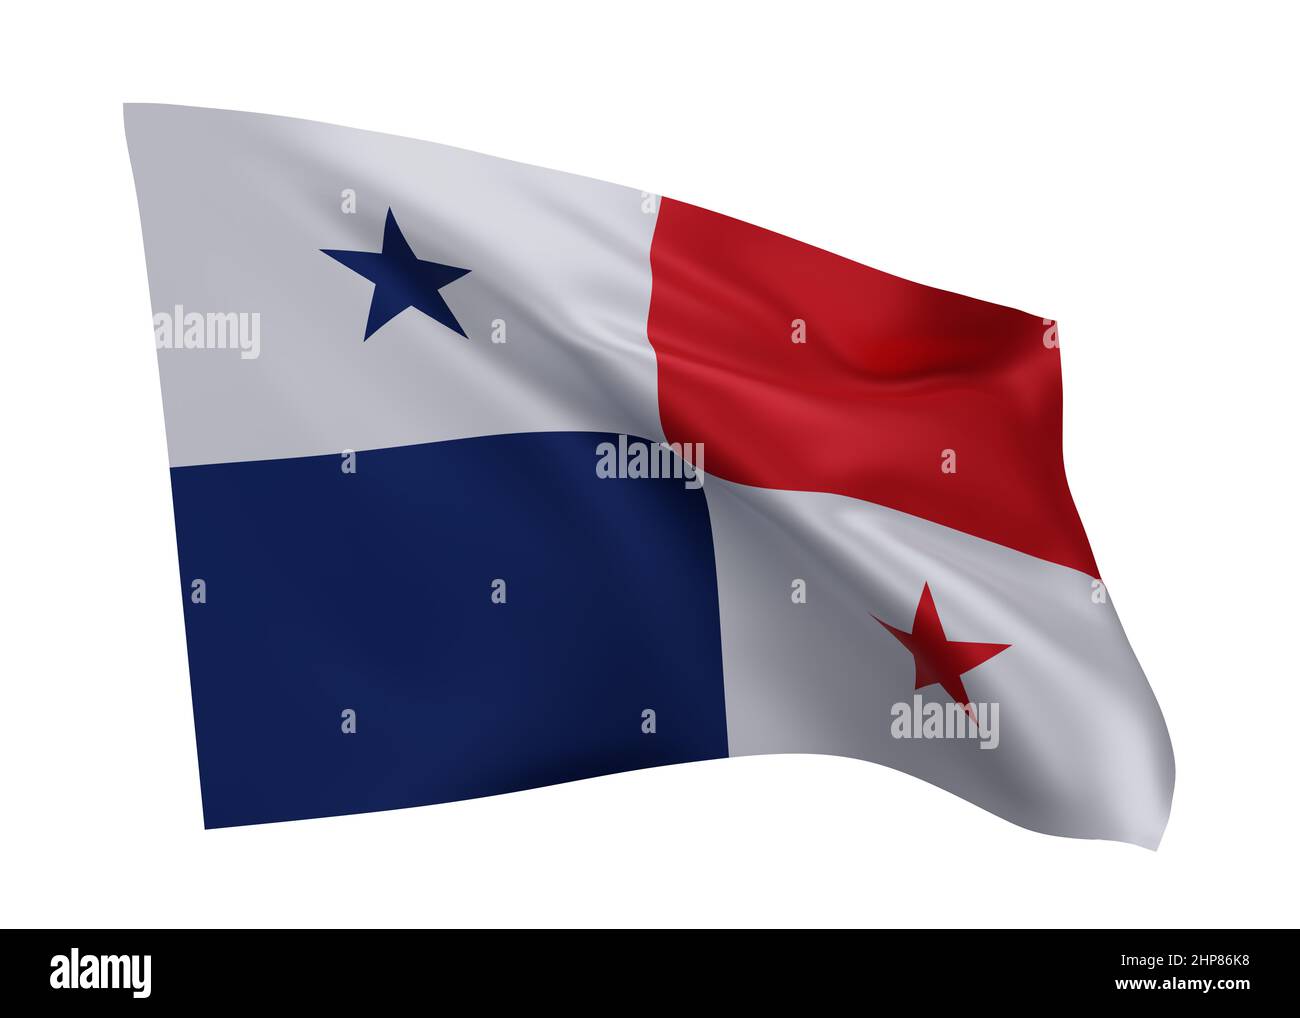 3d illustration flag of Panama. Panamanian high resolution flag isolated against white background. 3d rendering Stock Photo